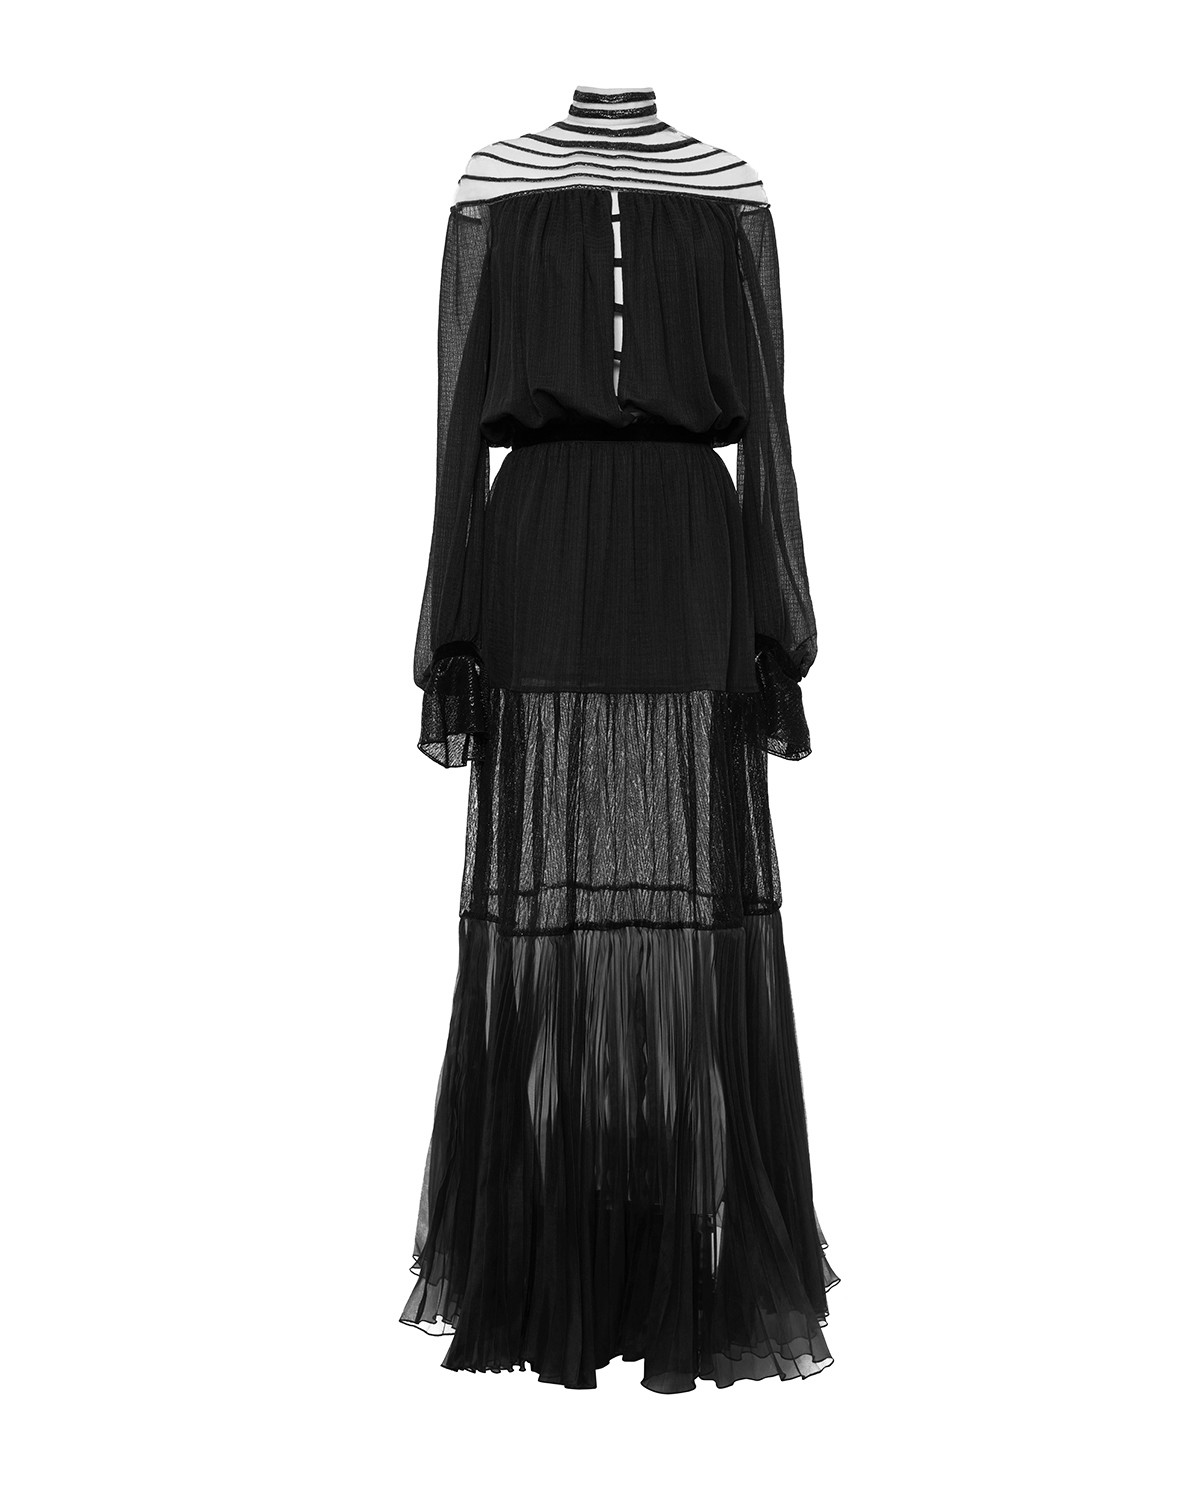 Black chiffon gown with lamé embroidery